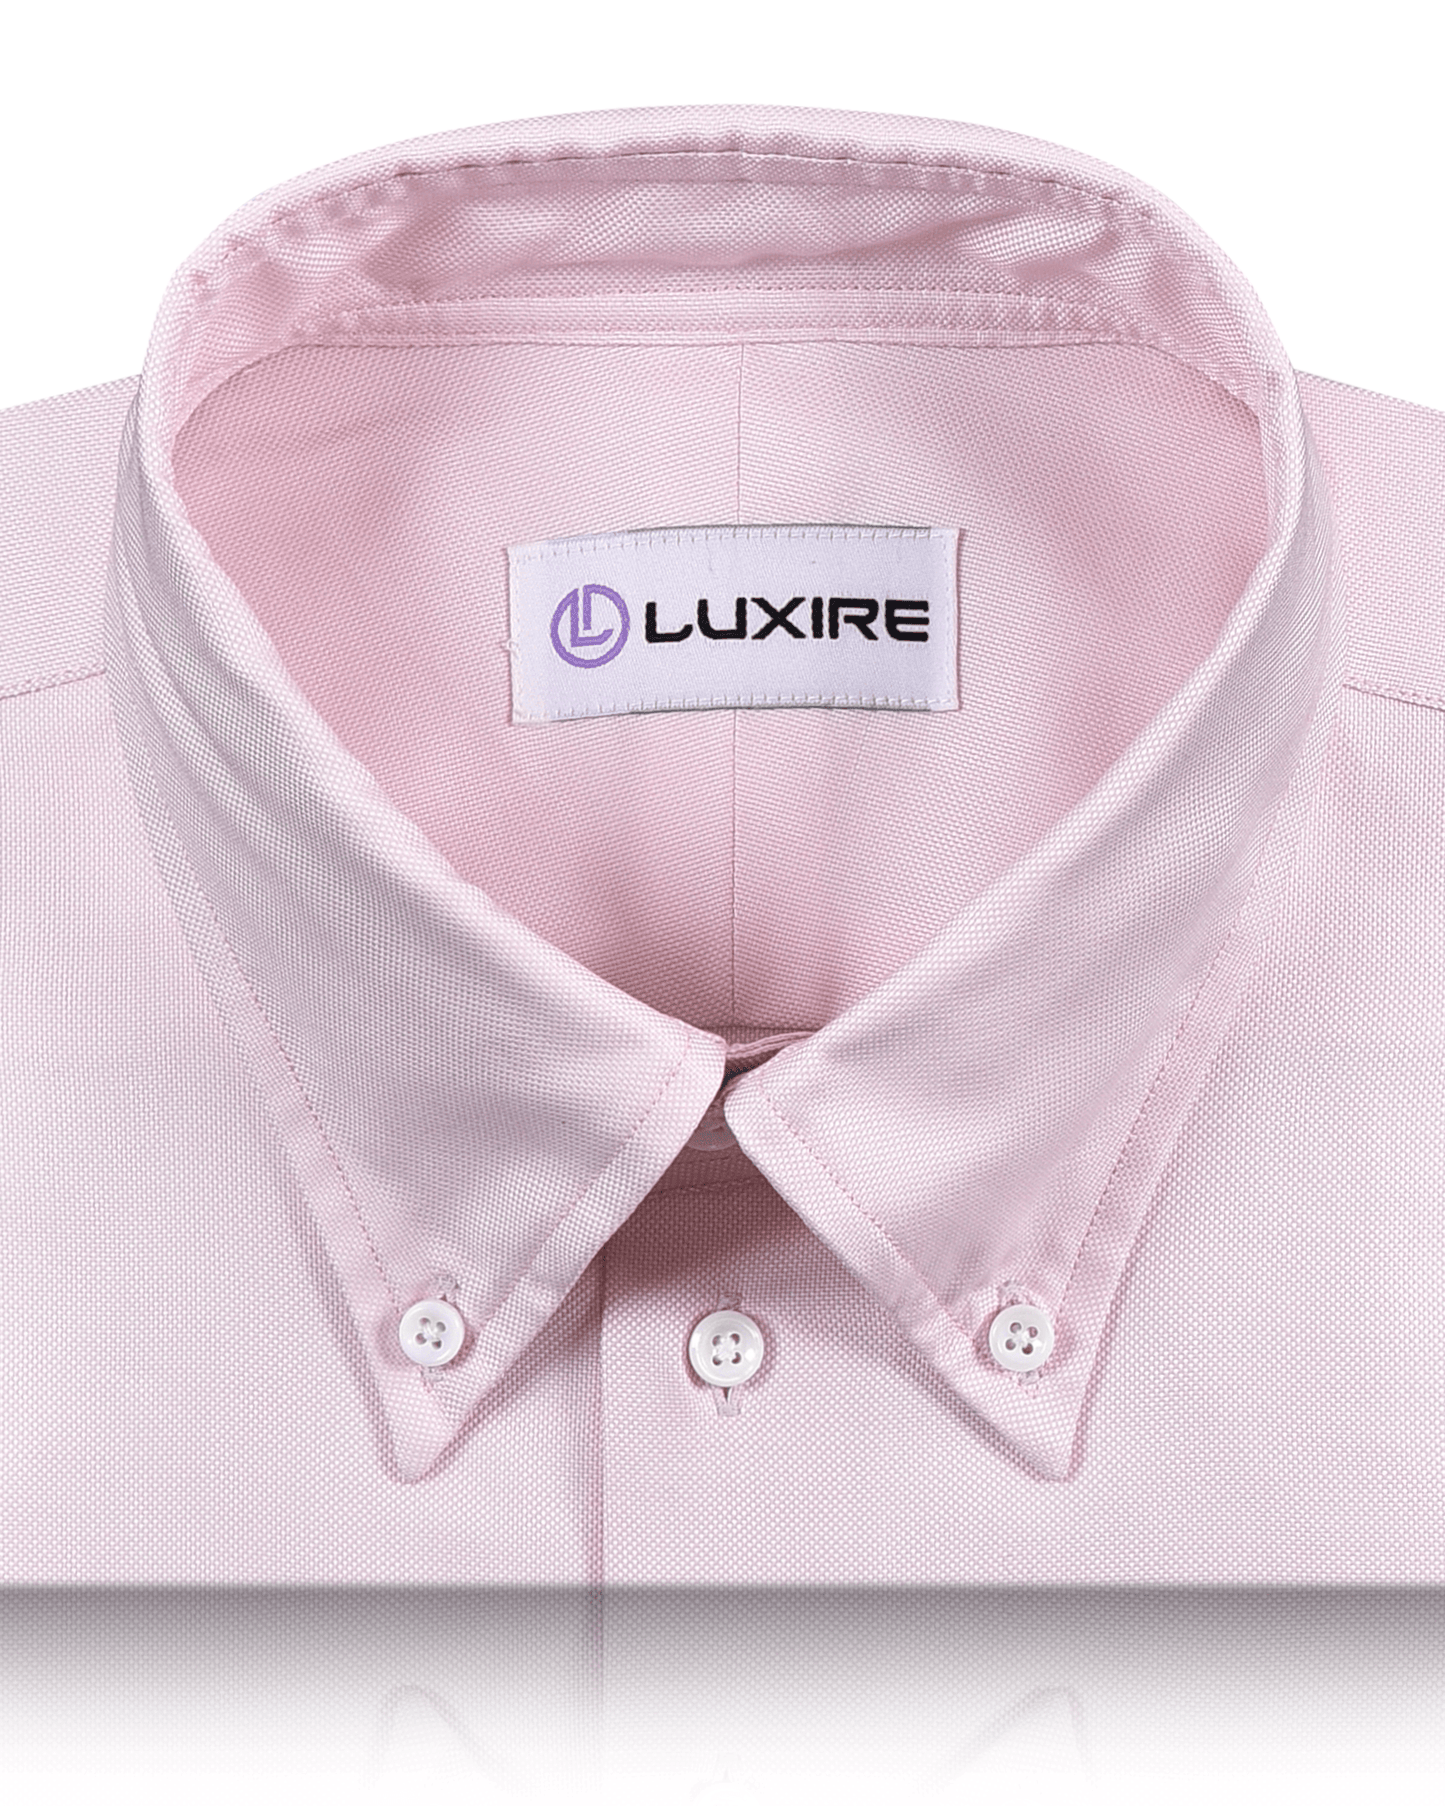 Collar of the custom oxford shirt for men by Luxire in baby pink royal